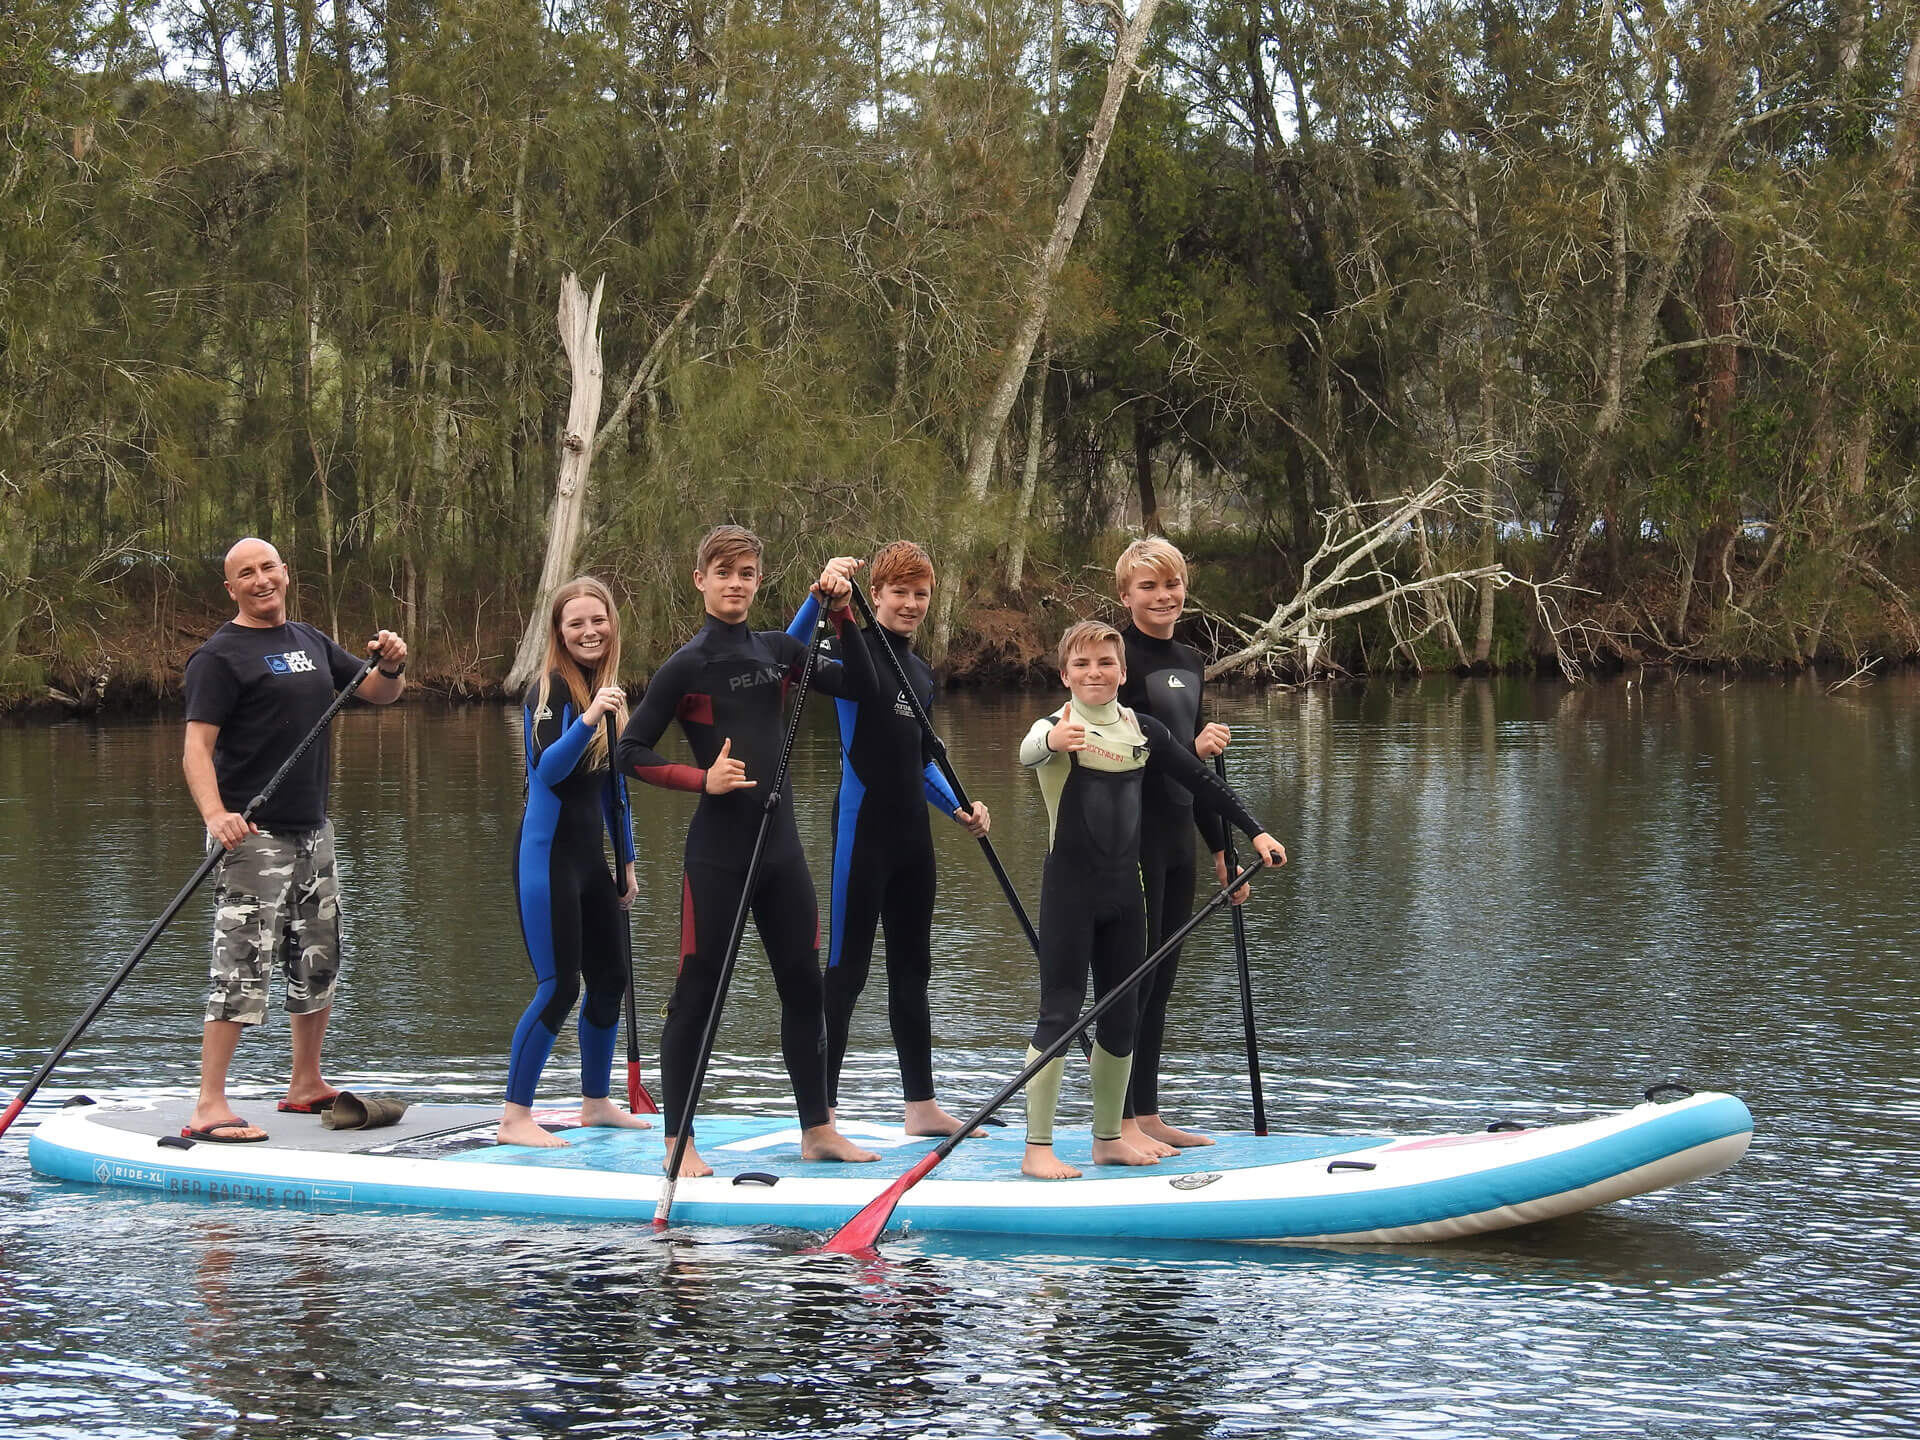 Group of smiling children and coach standing on monster paddle board on the water